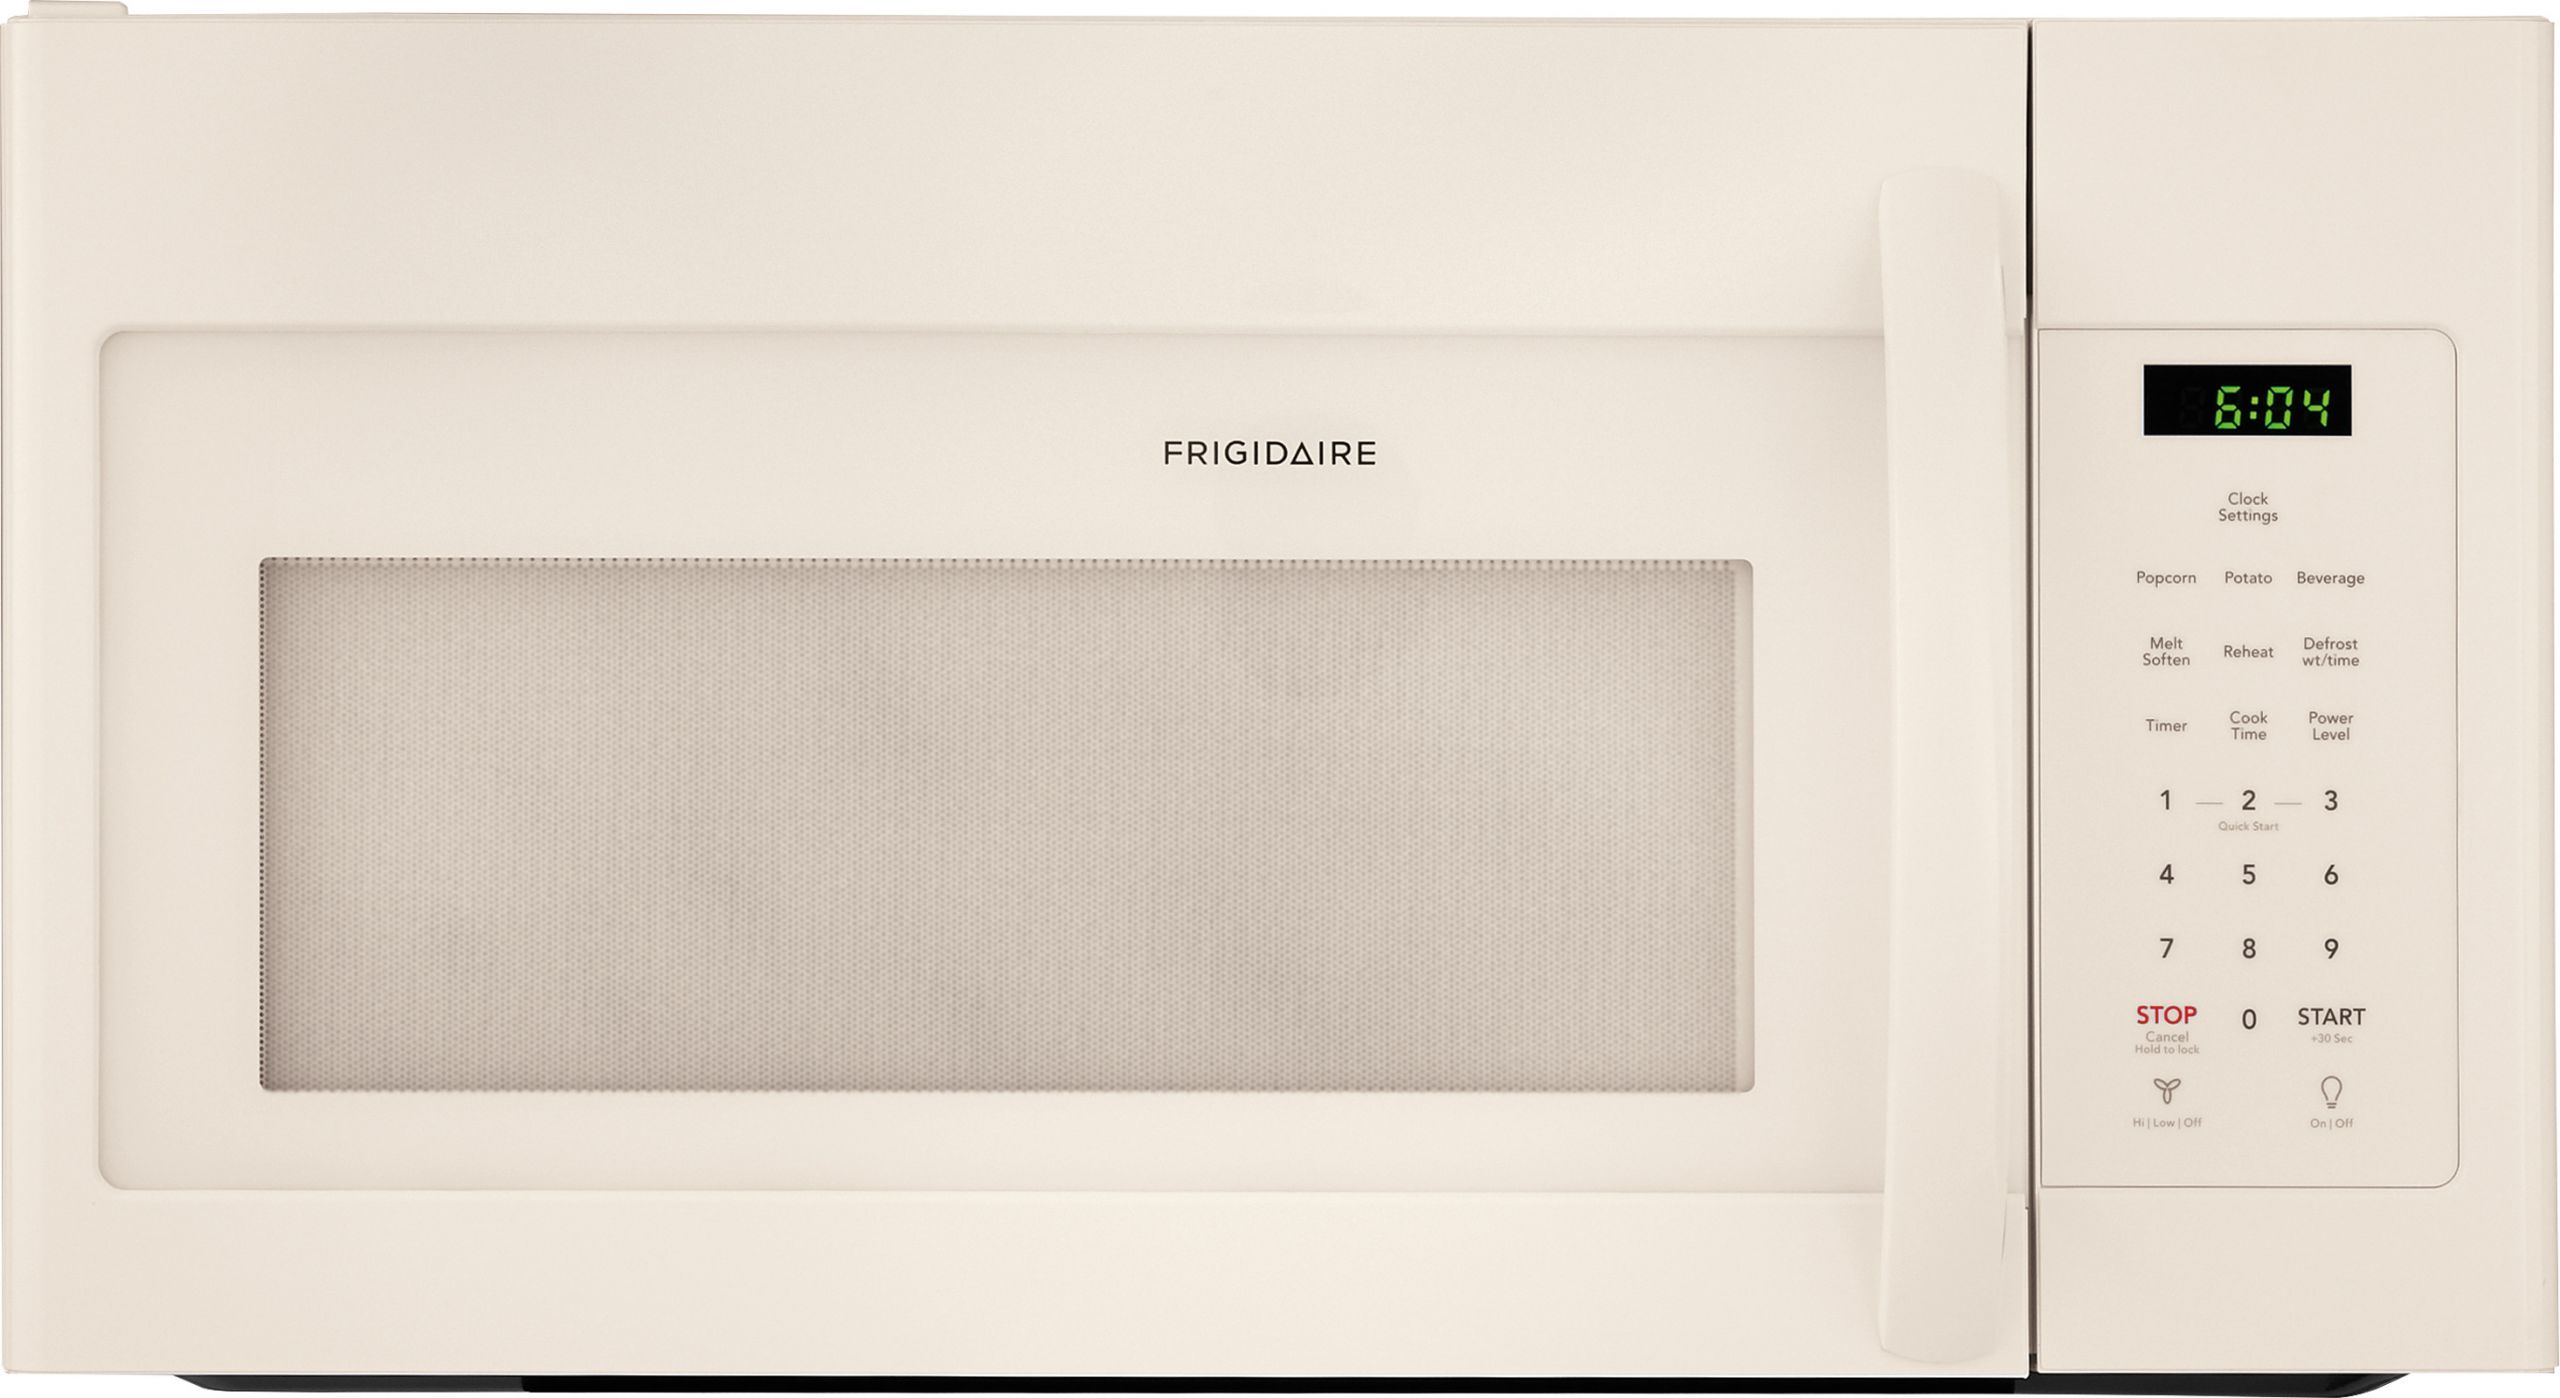 Over The Range Microwave Bisque
 Frigidaire FFMV1645TQ 30" Over The Range Microwave Bisque